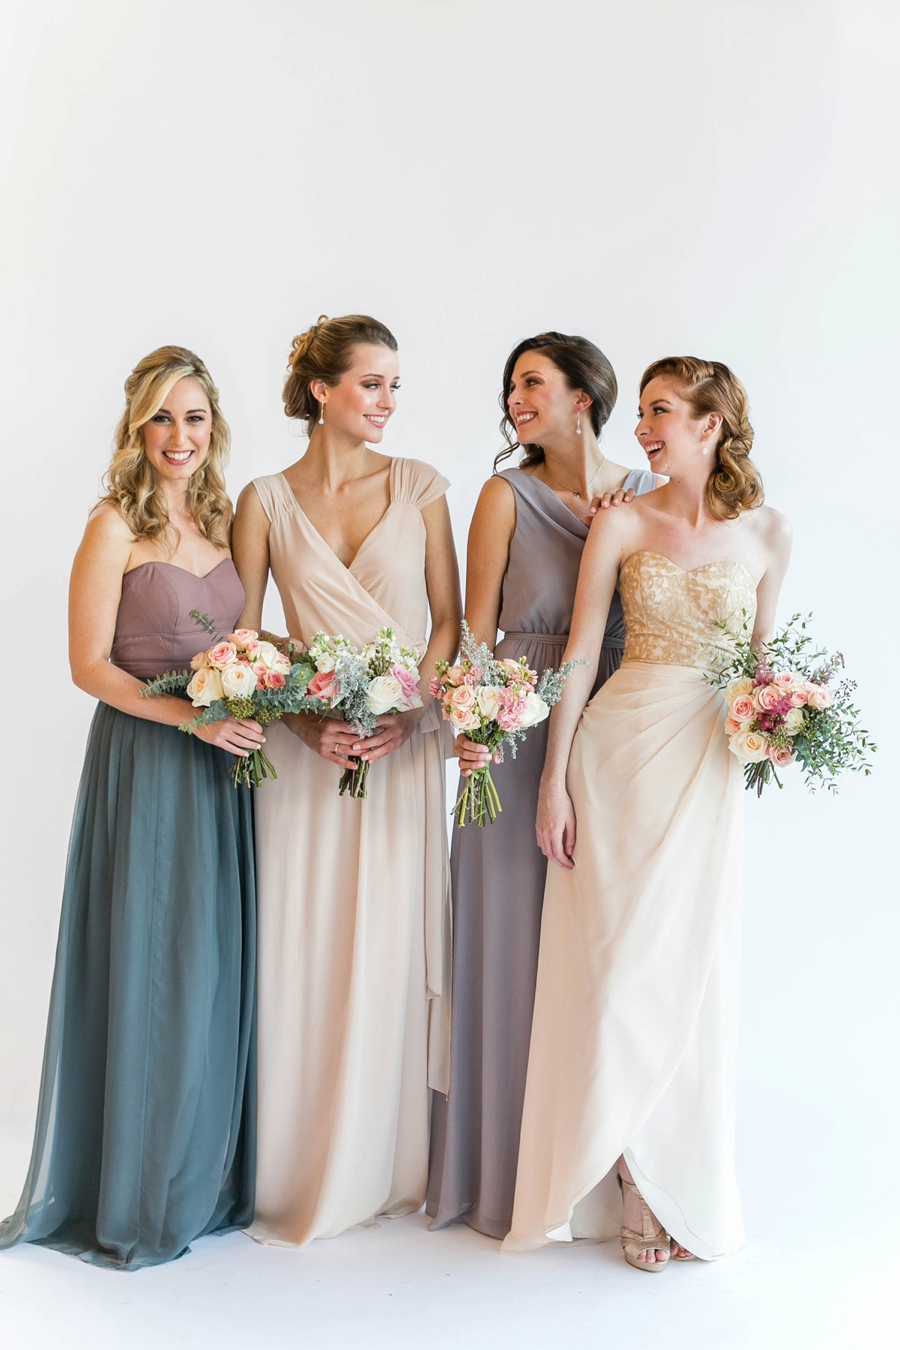 Mix And Match Bridesmaid Dresses From Brideside Every Last Detail